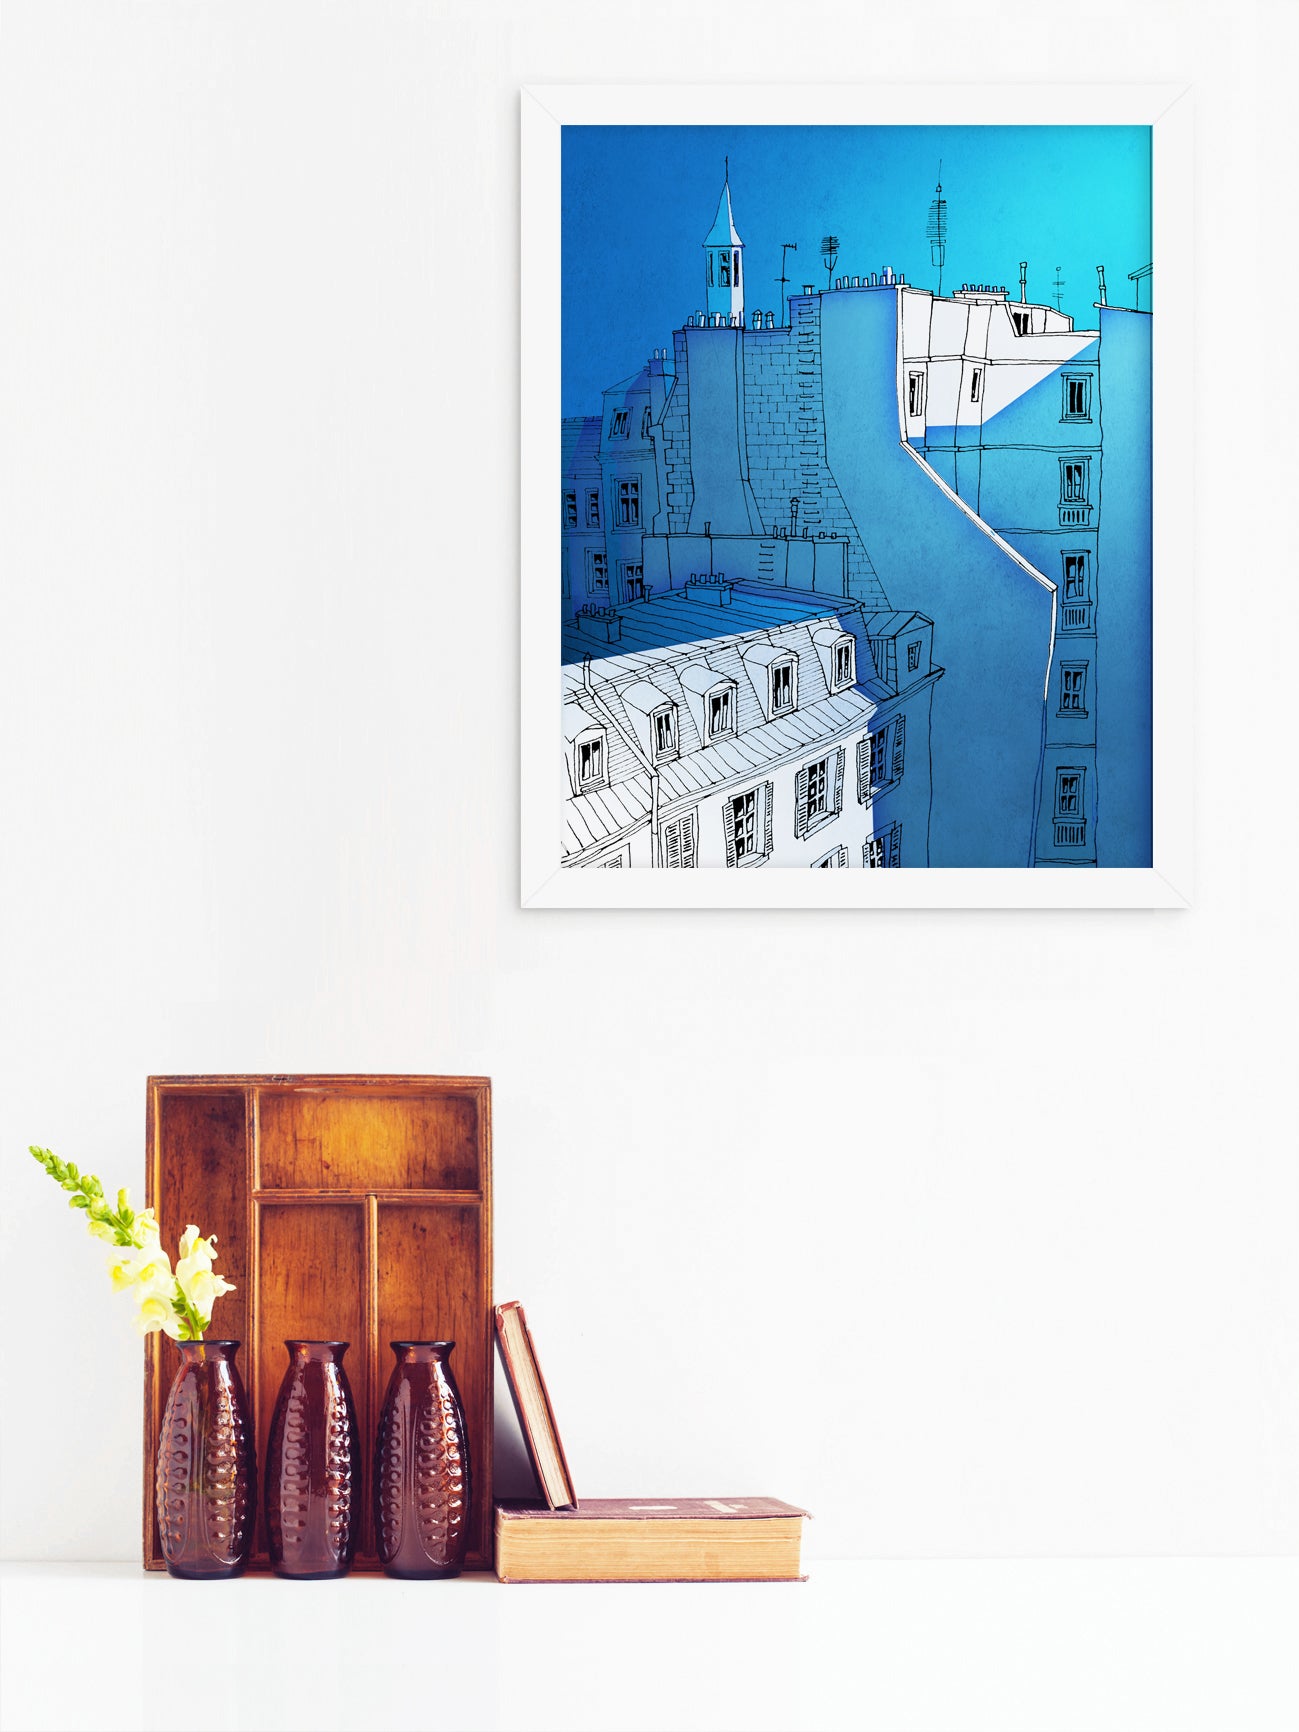 In an old house in Paris - Framed Art Print